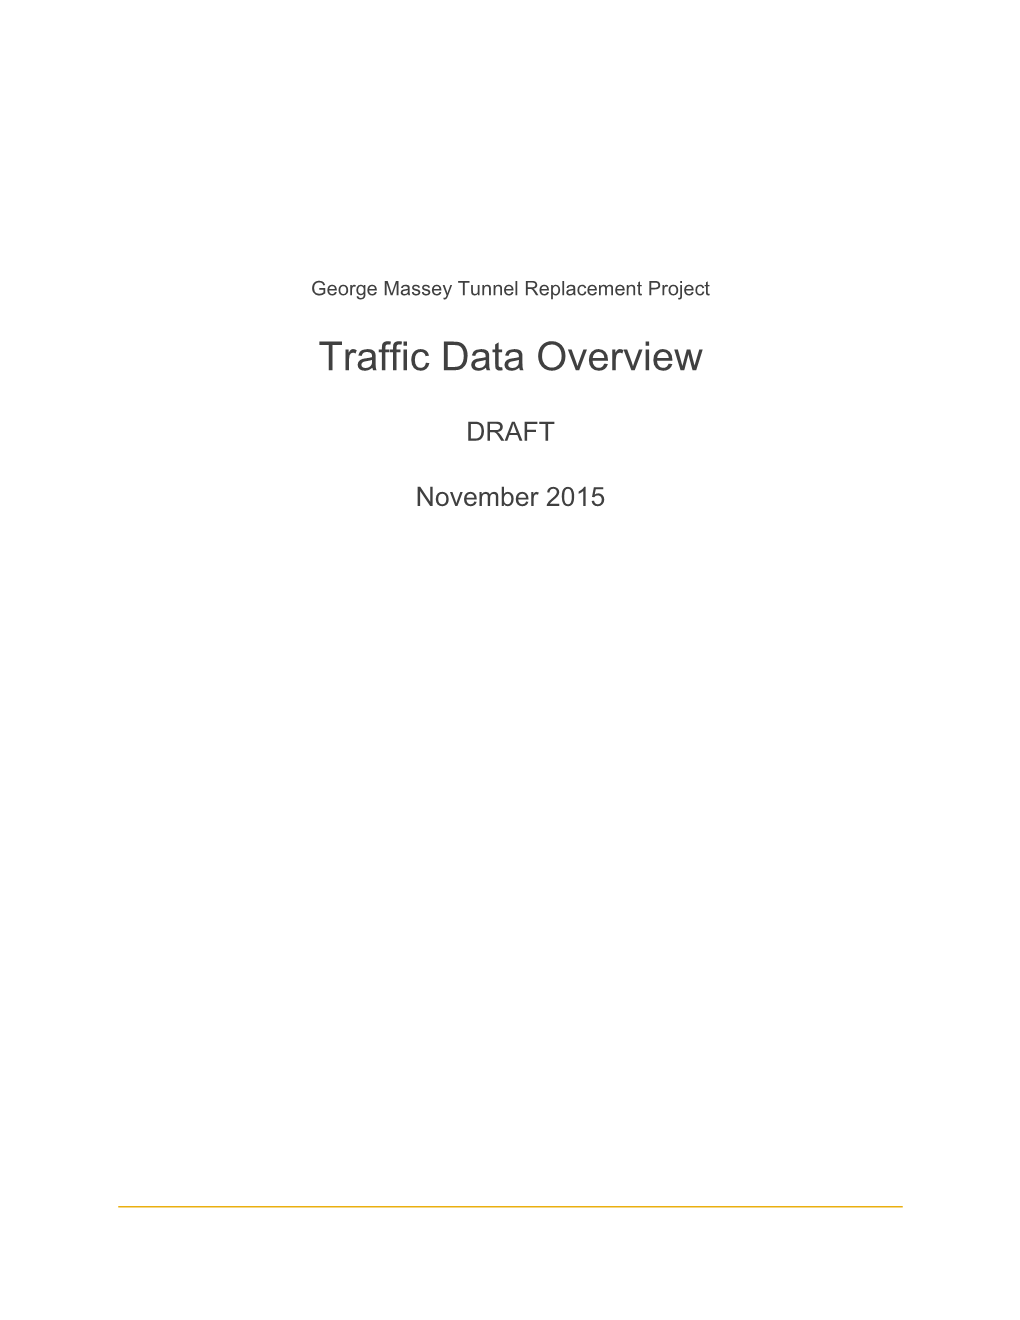 Traffic Data Overview (2015)